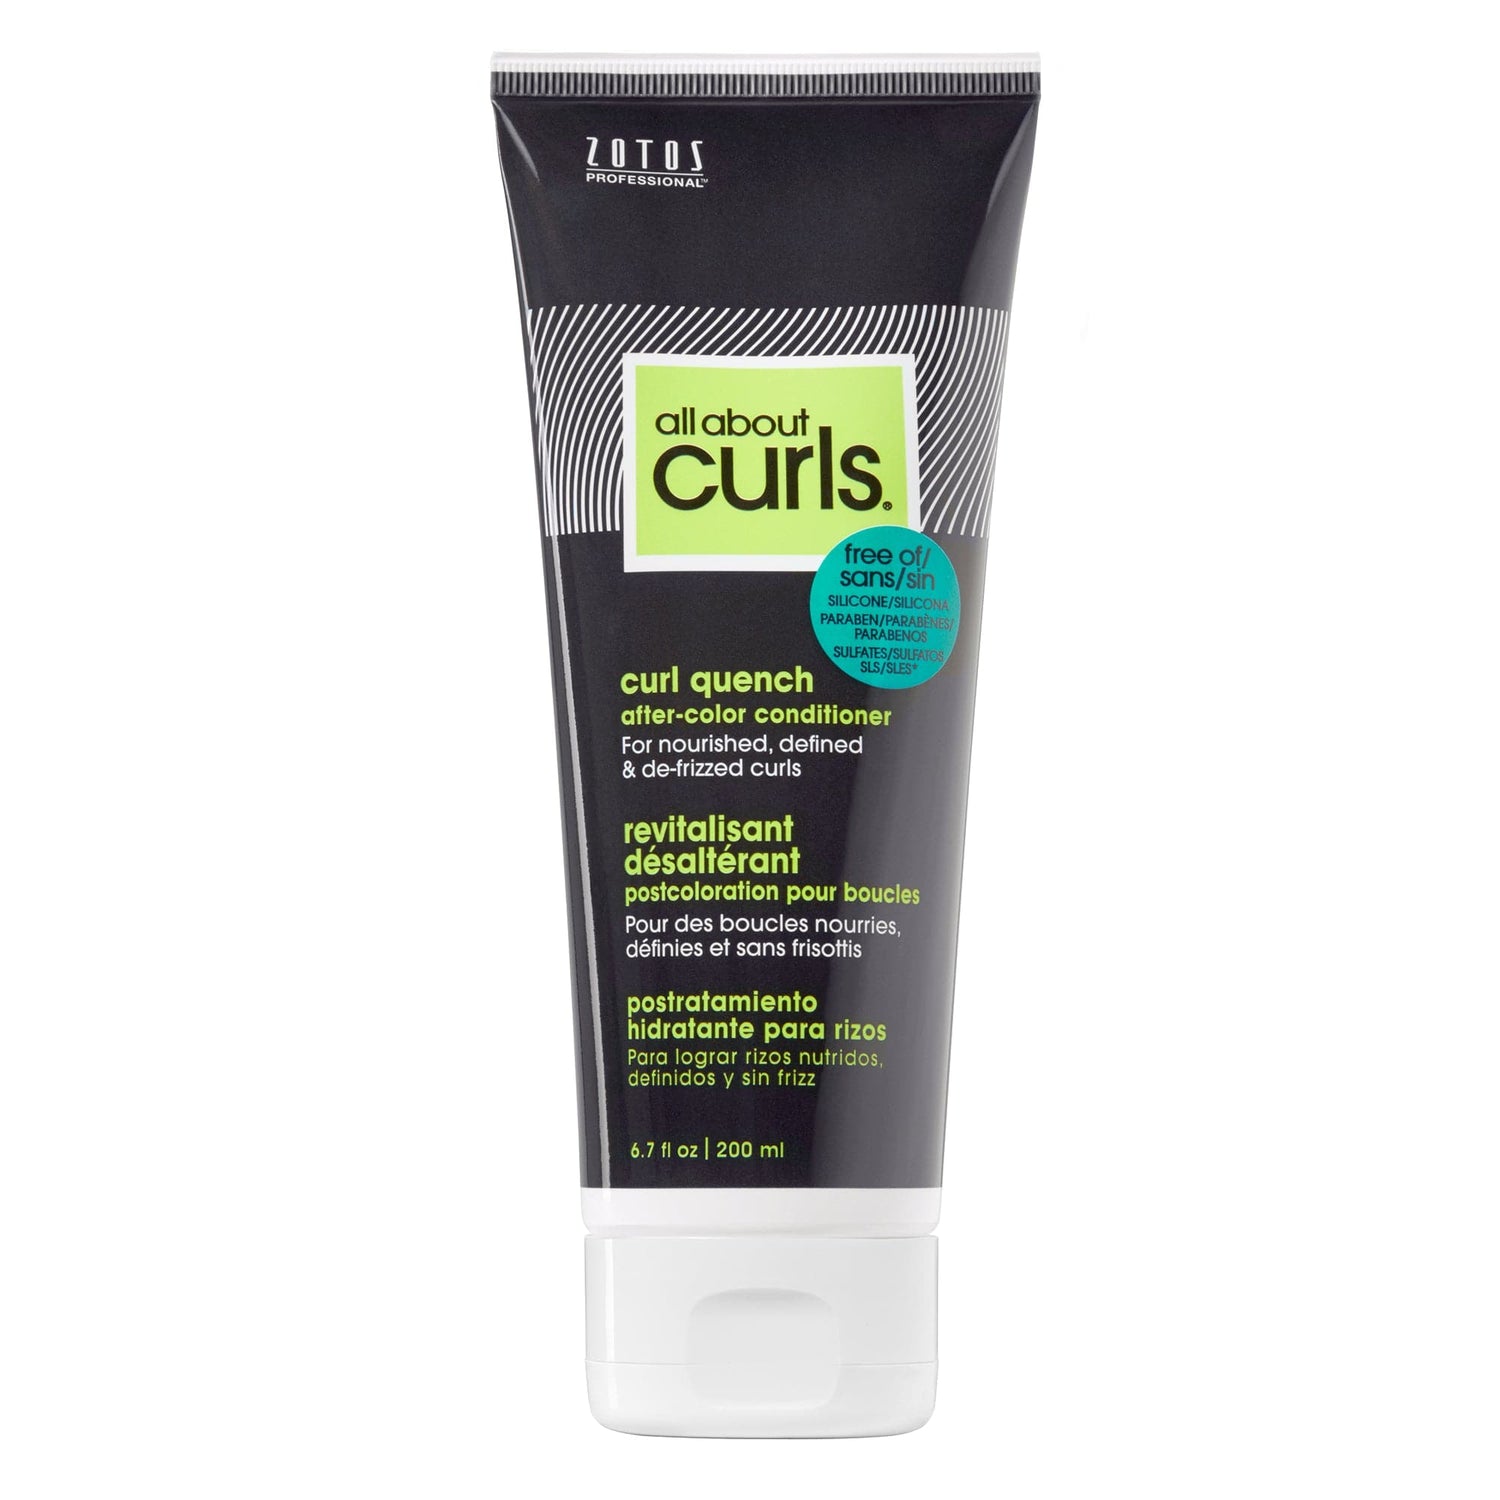 Tube of All About Curls Quench After-Color Conditioner.